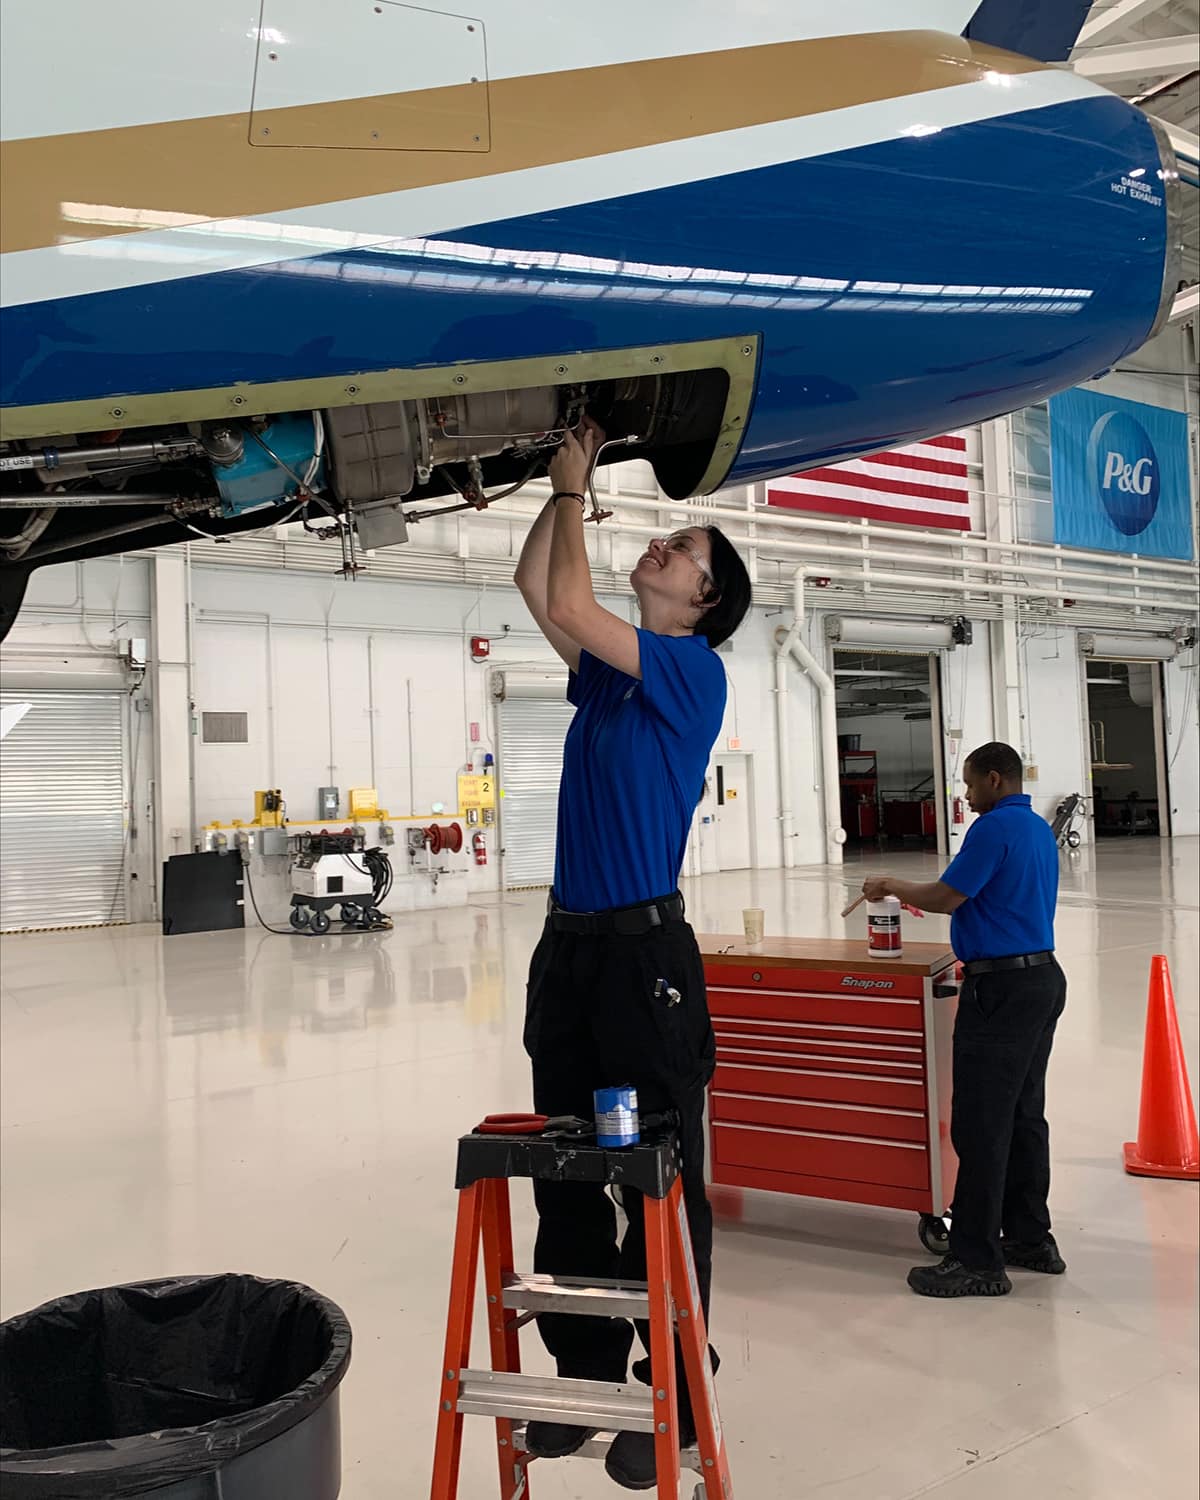 As part her summer internship at Proctor & Gamble, Shelby Quillinan is shown here working near the tail section of one of the company’s four business jets. (Photo: Shelby Quillinan)